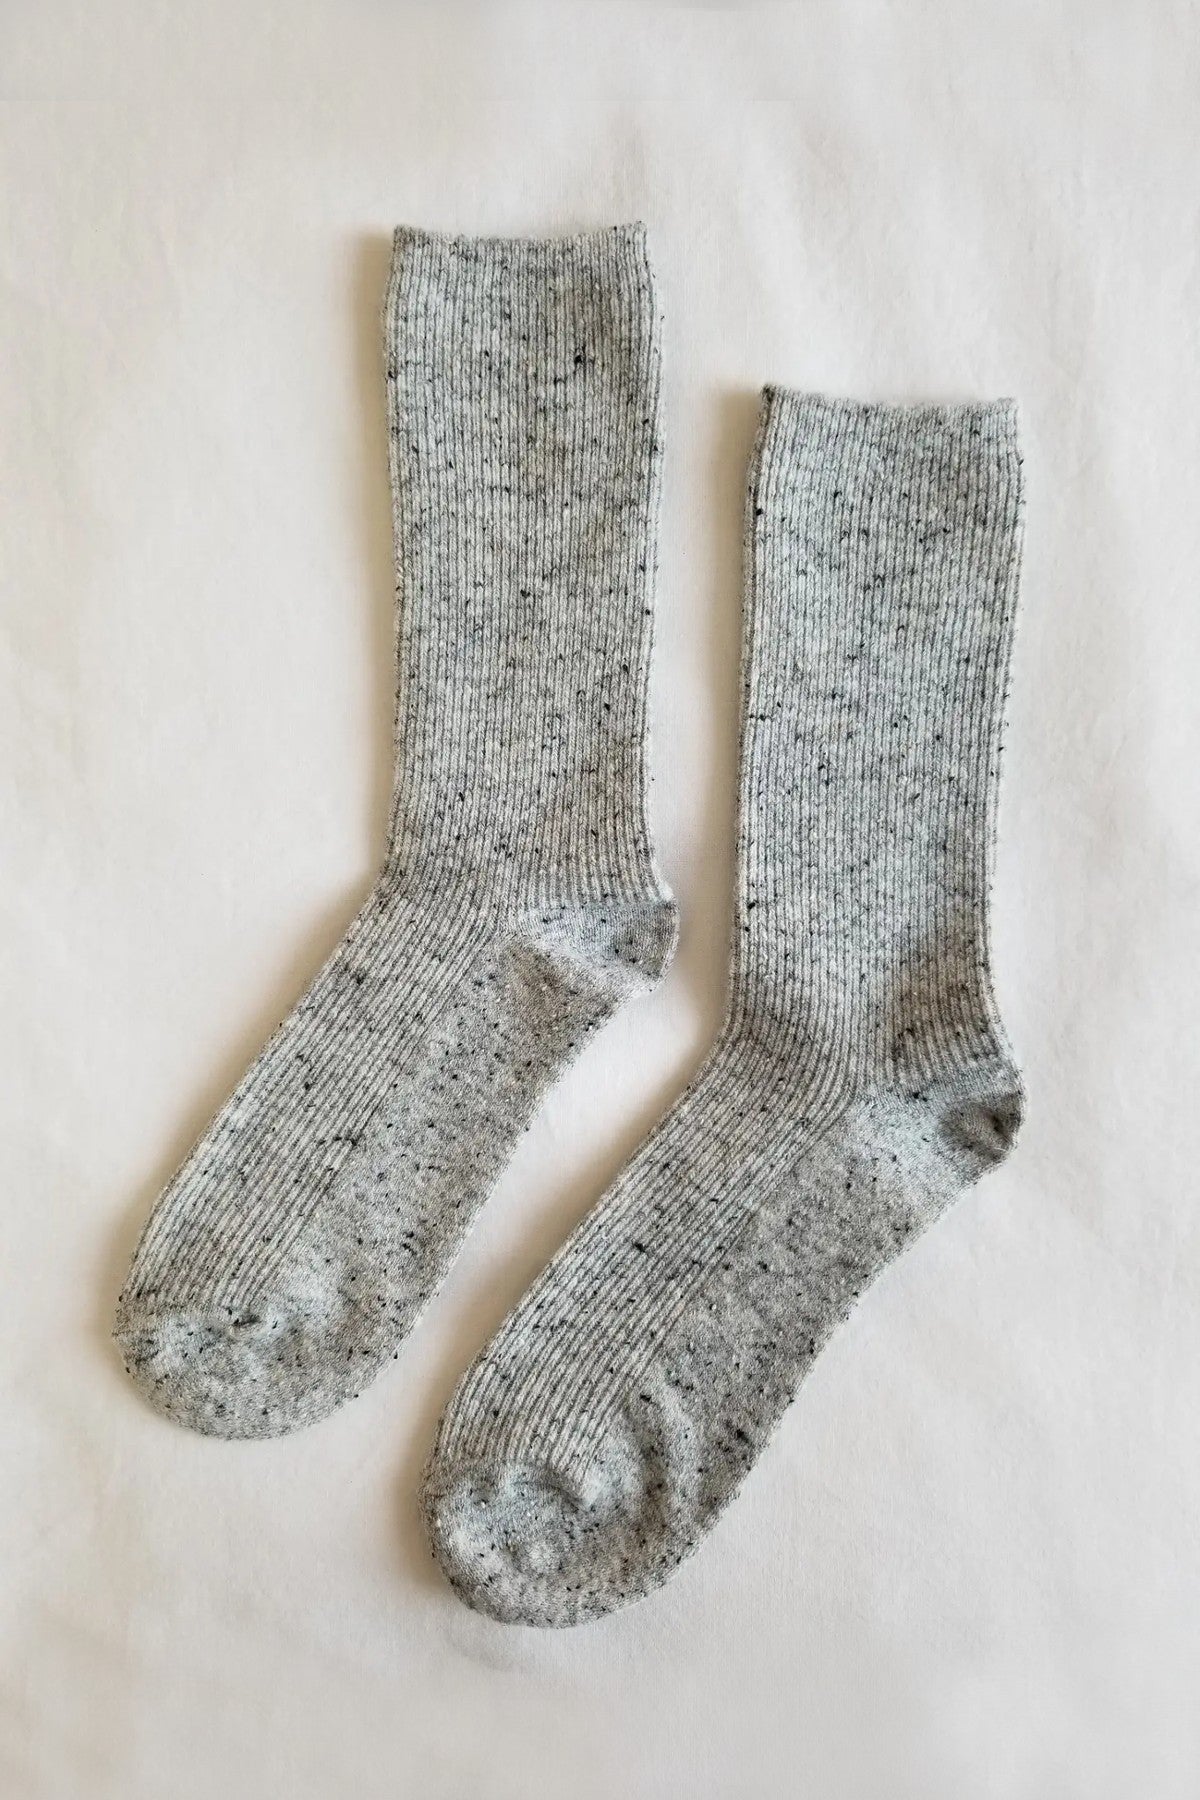 LE BON SHOPPE SNOW SOCKS - Women's Slow Fashion Accessories - Ribbed Trouser Socks in "Cookes & Creme" Grey Wool